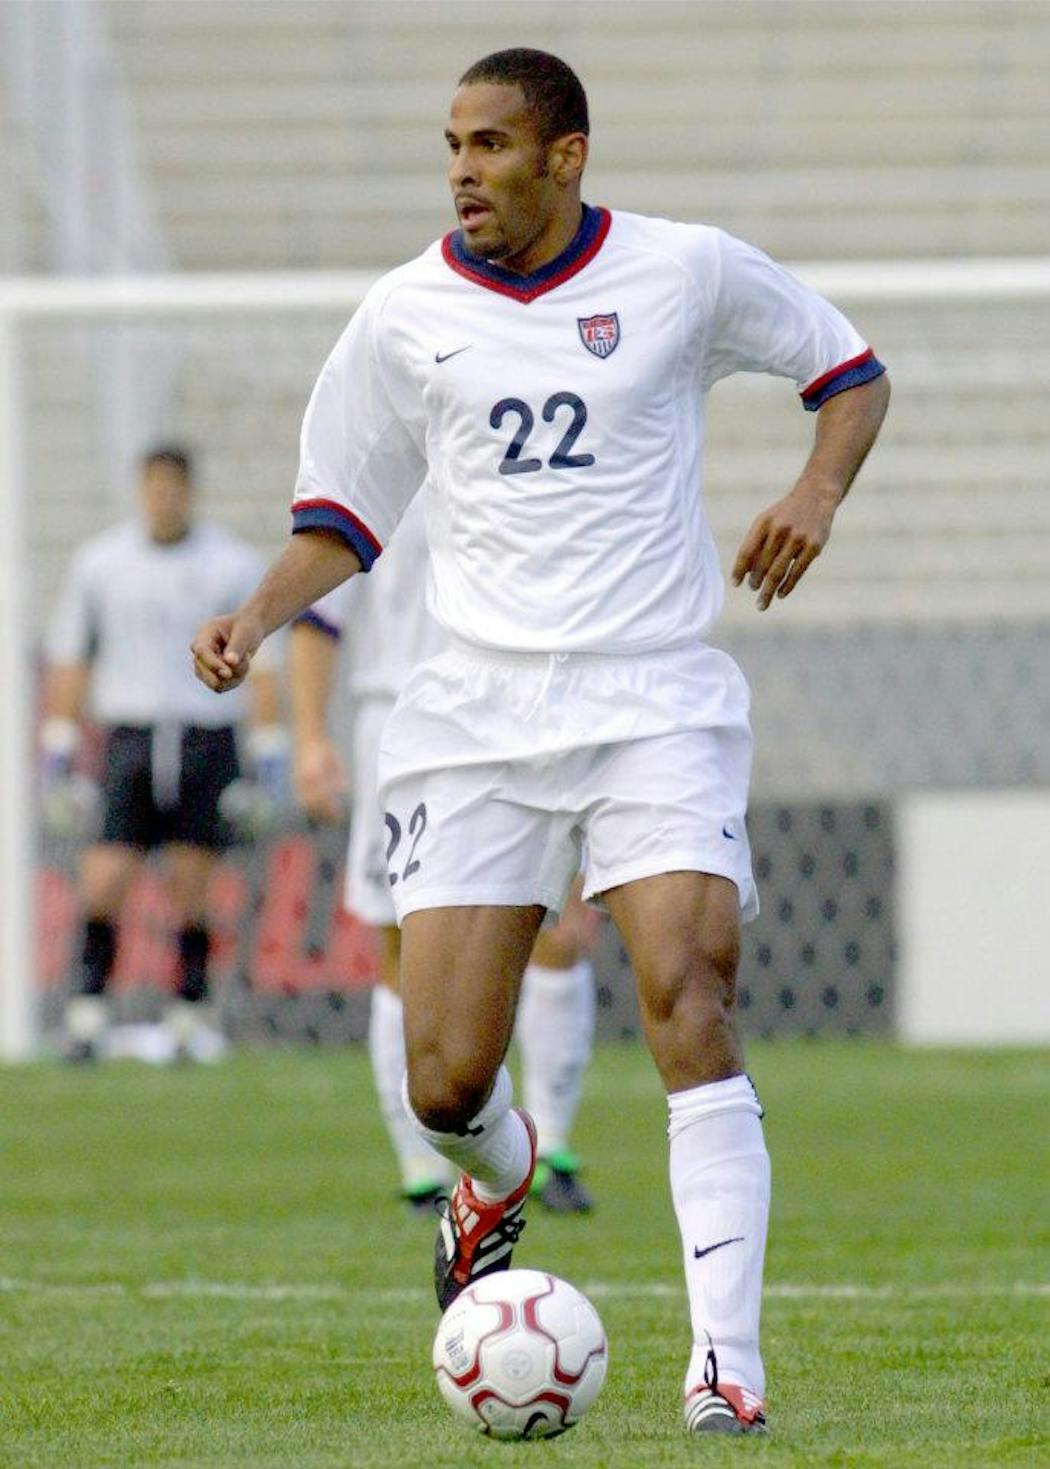 Tony Sanneh played in the 2002 World Cup for the U.S. Men’s National Team.